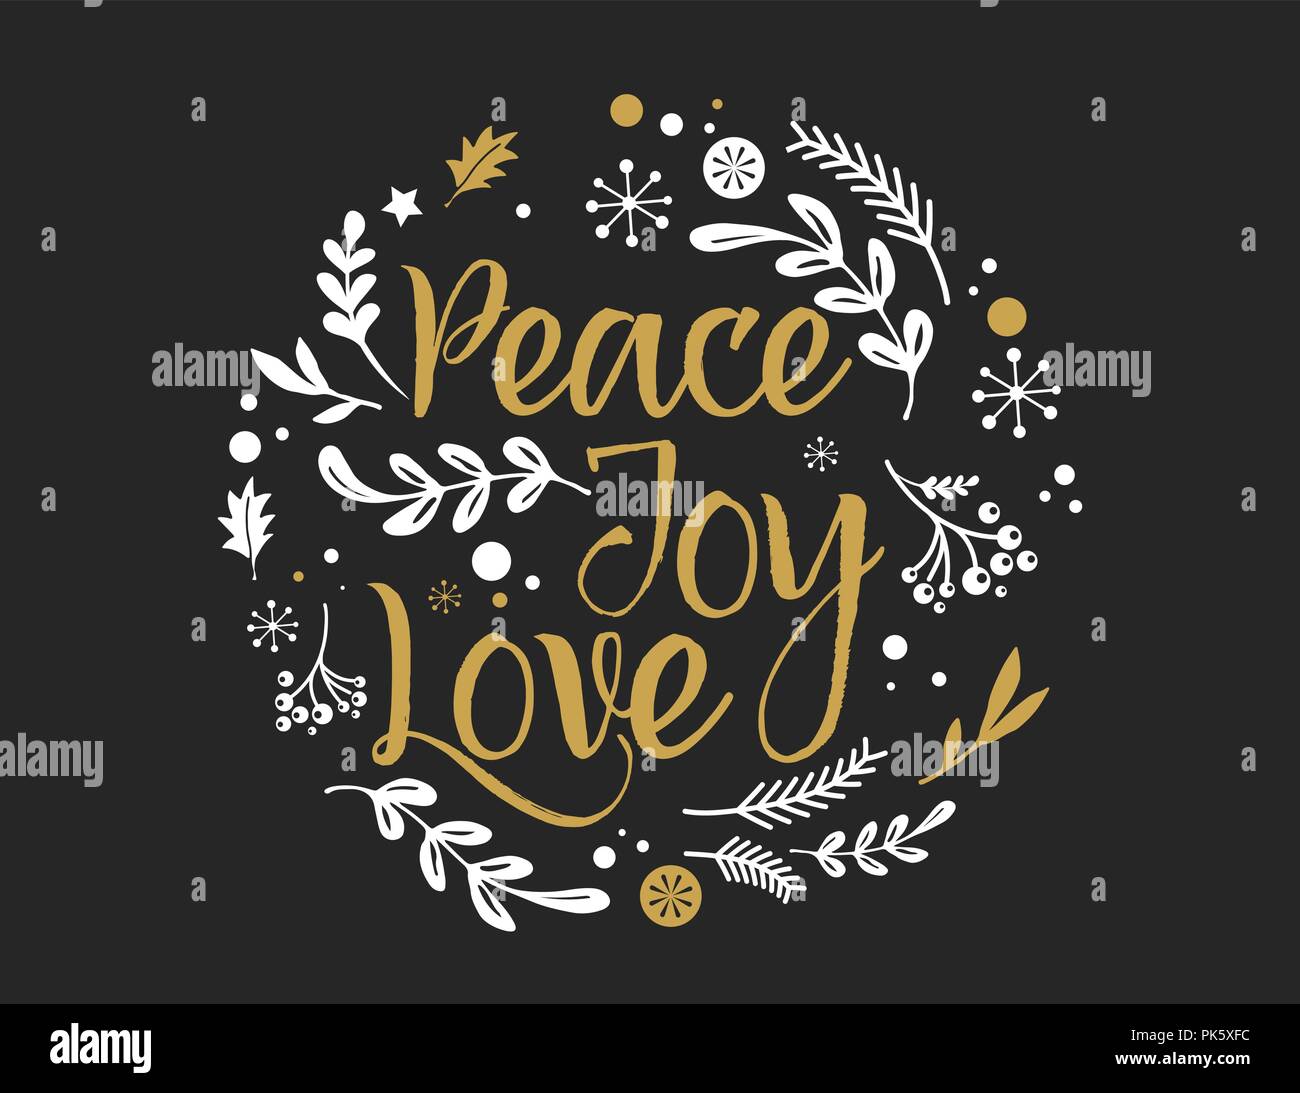 Merry Christmas Background with Typography, Lettering. Greeting card - Peace, Joy, Love - stock vector Stock Vector